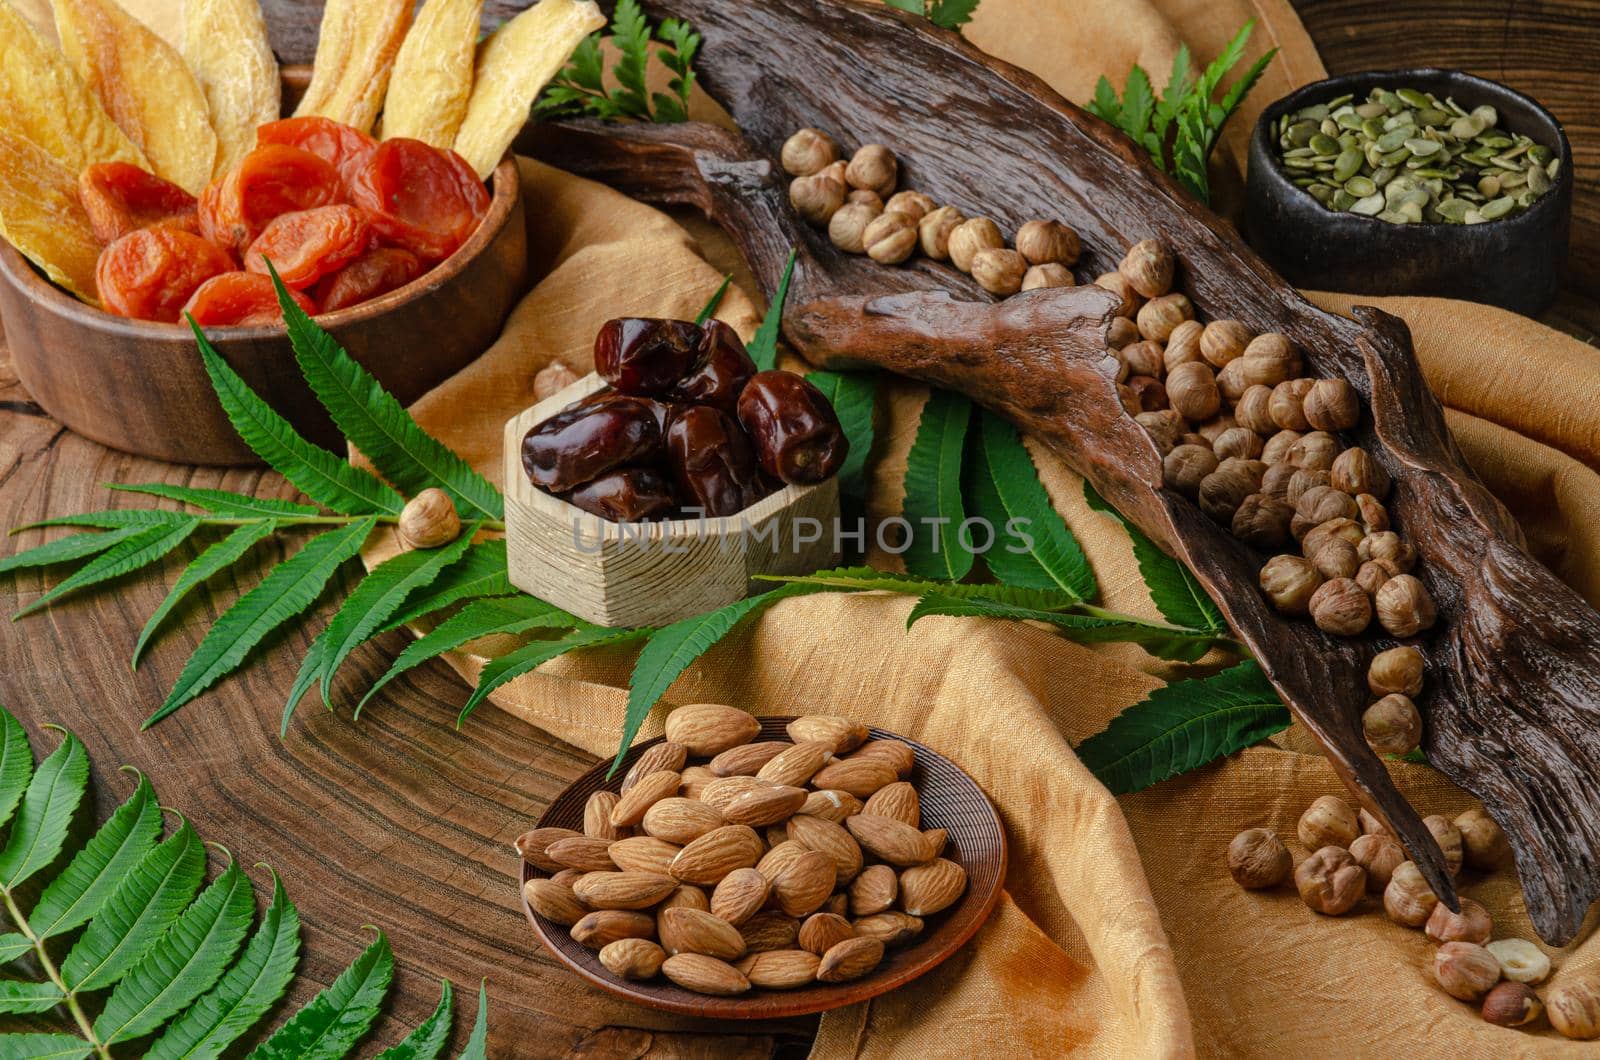 still life of nuts and dried fruits on a wooden table with fern leaves